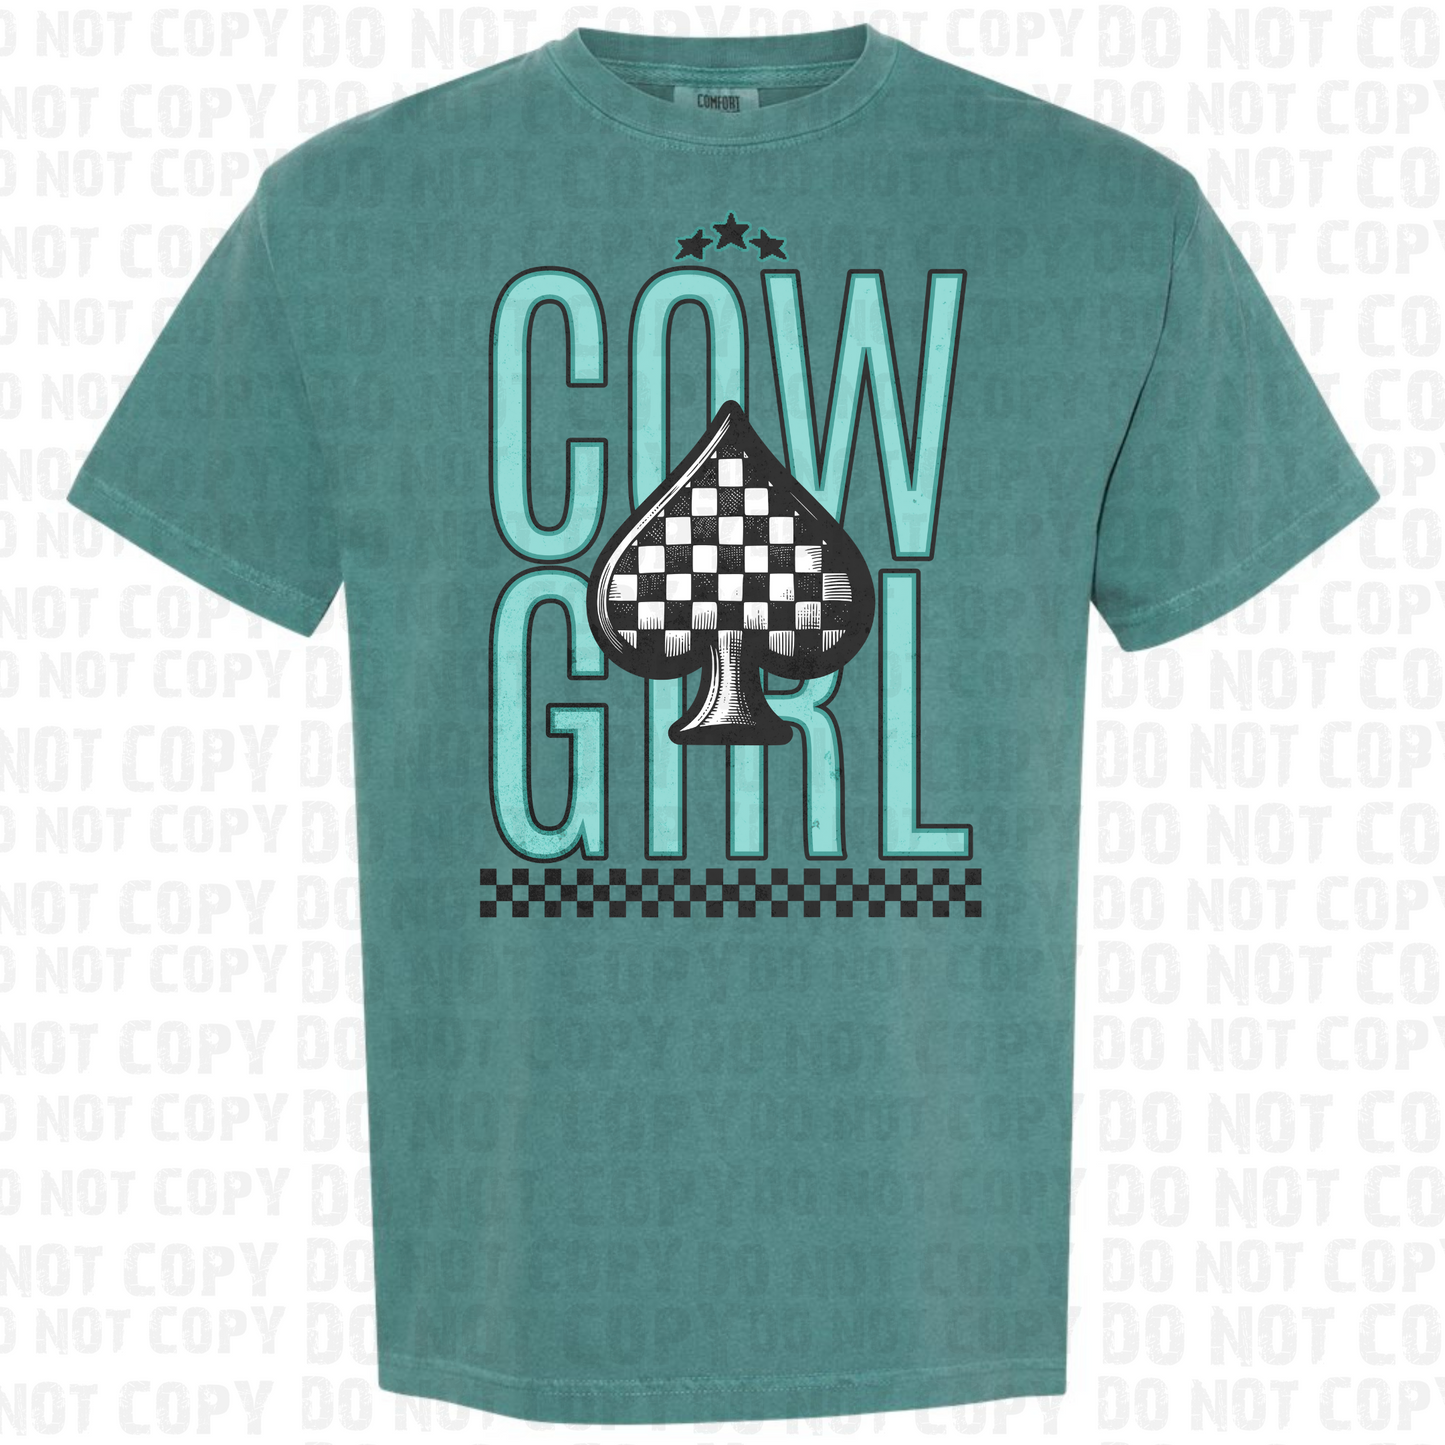 Cow Girl - Big Teal Stacked